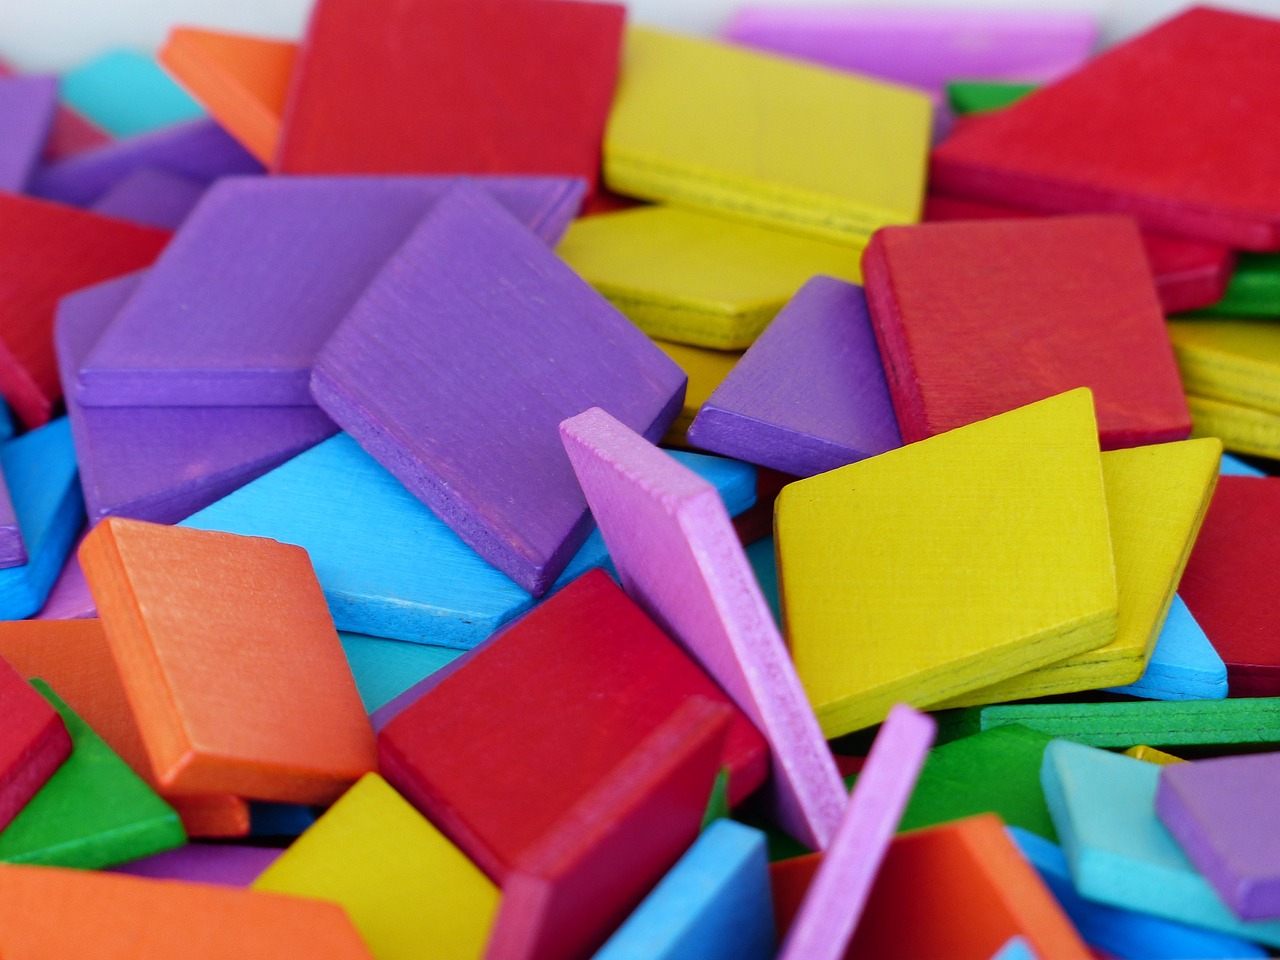 a pile of colorful wooden blocks sitting on top of each other, a picture, pexels, color field, square shapes, colorful gems, wallpaper - 1 0 2 4, floating pieces